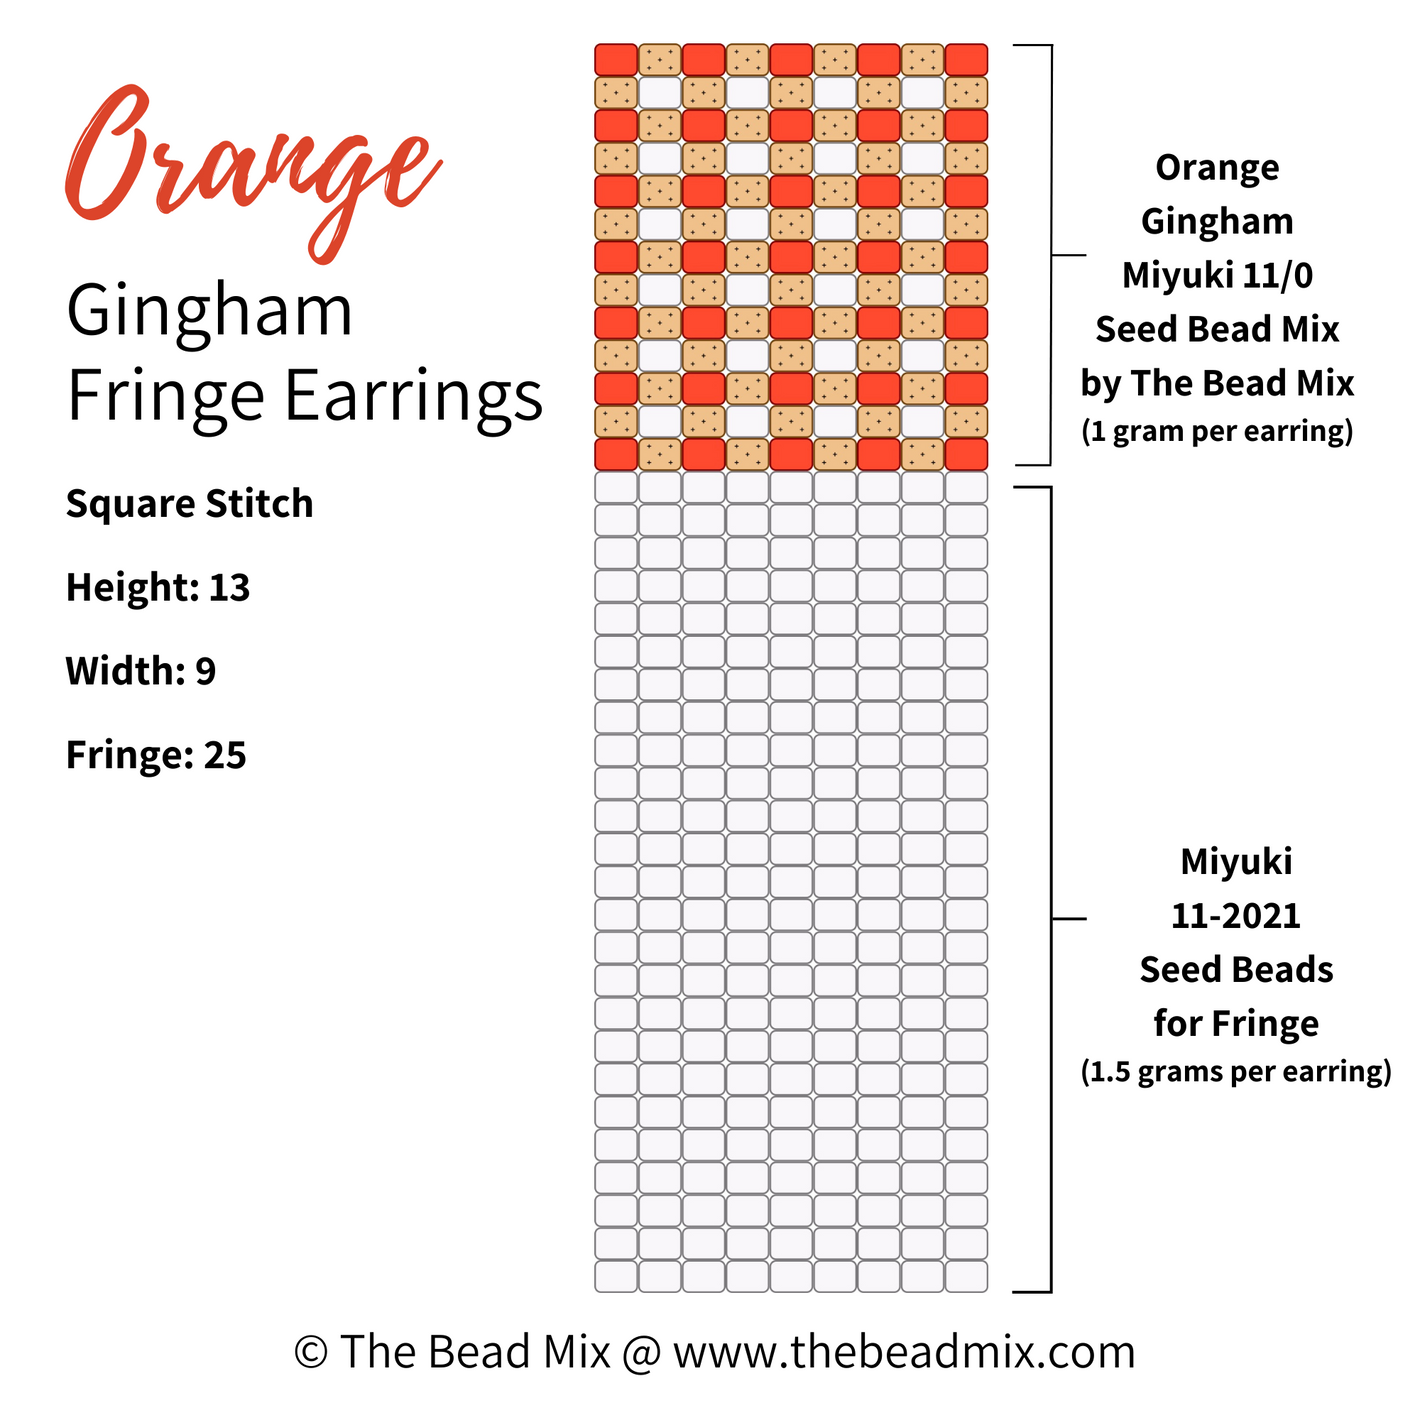 Free square stitch beading pattern to make orange gingham pattern fringe earrings by The Bead Mix